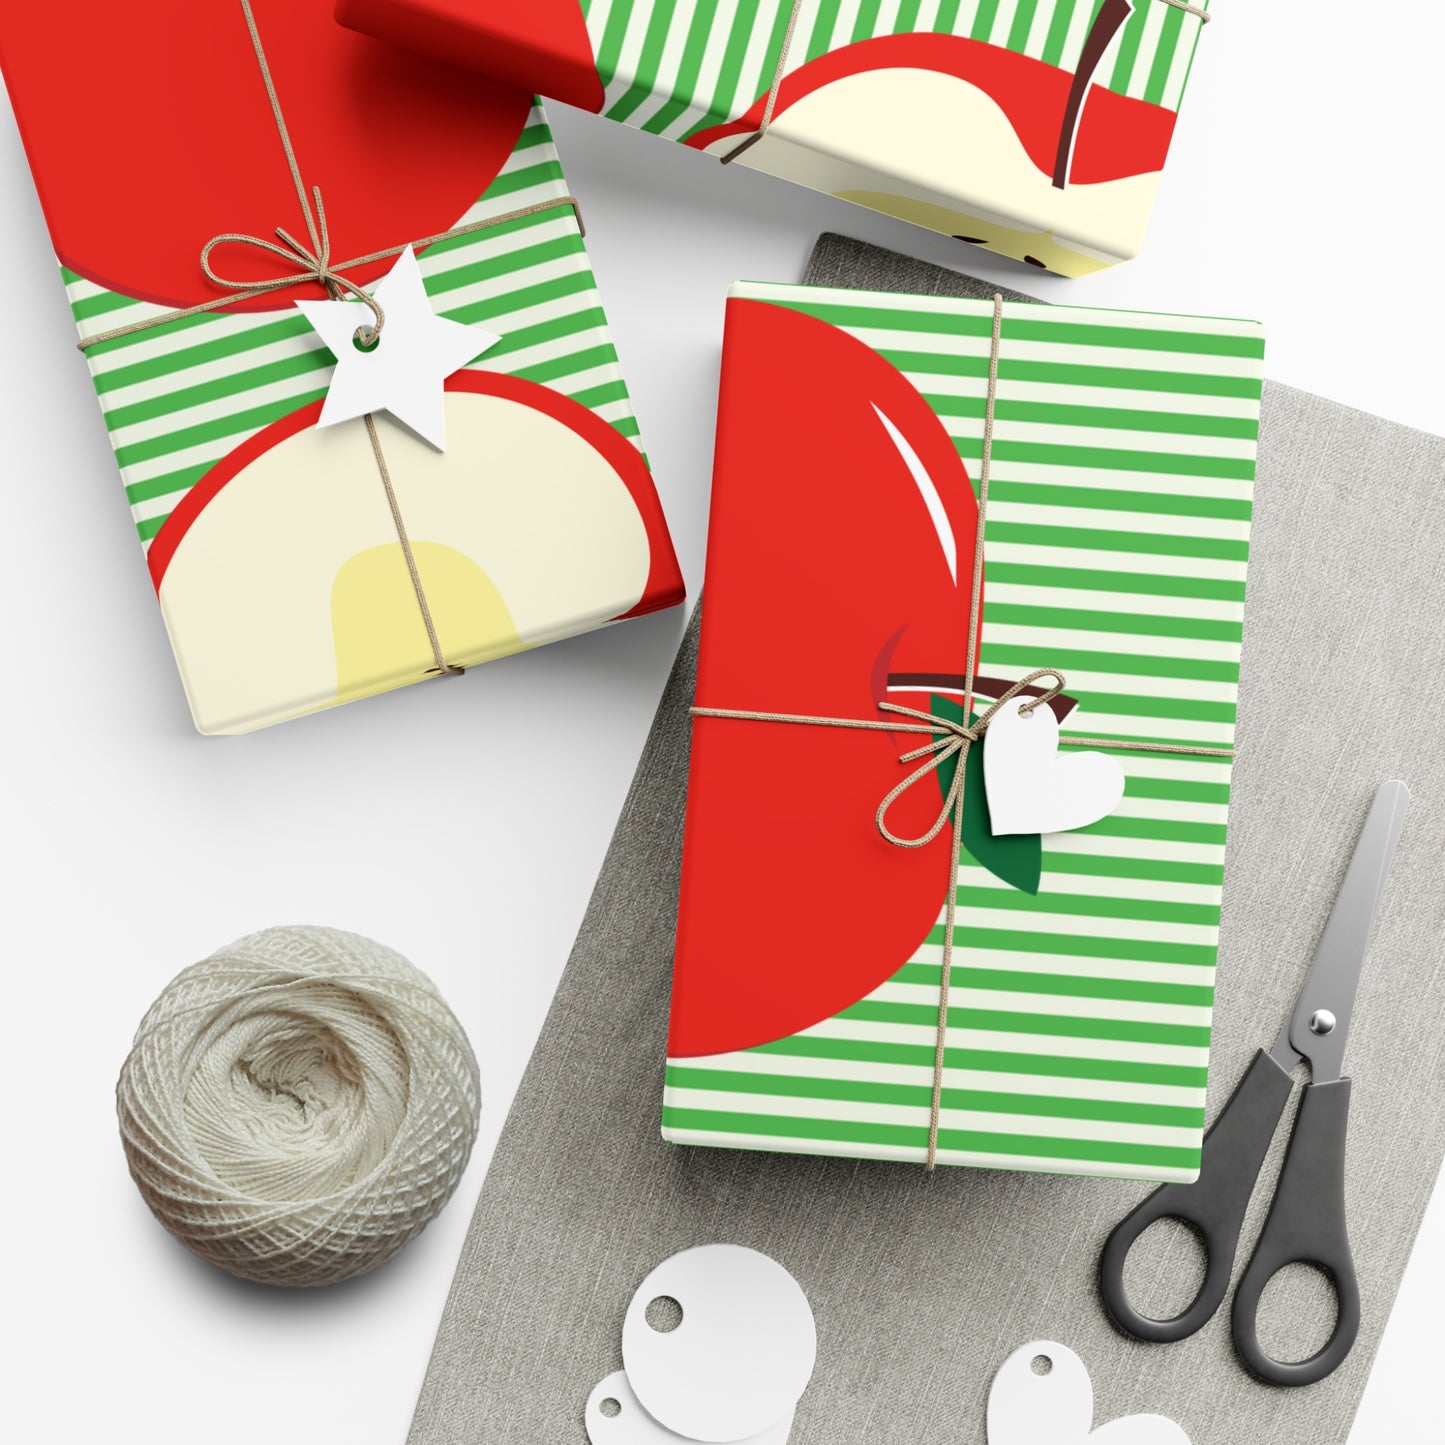 Apples on Green Stripes Gift Wrap Papers, Matte or Satin, Christmas Holiday Wrapping Paper